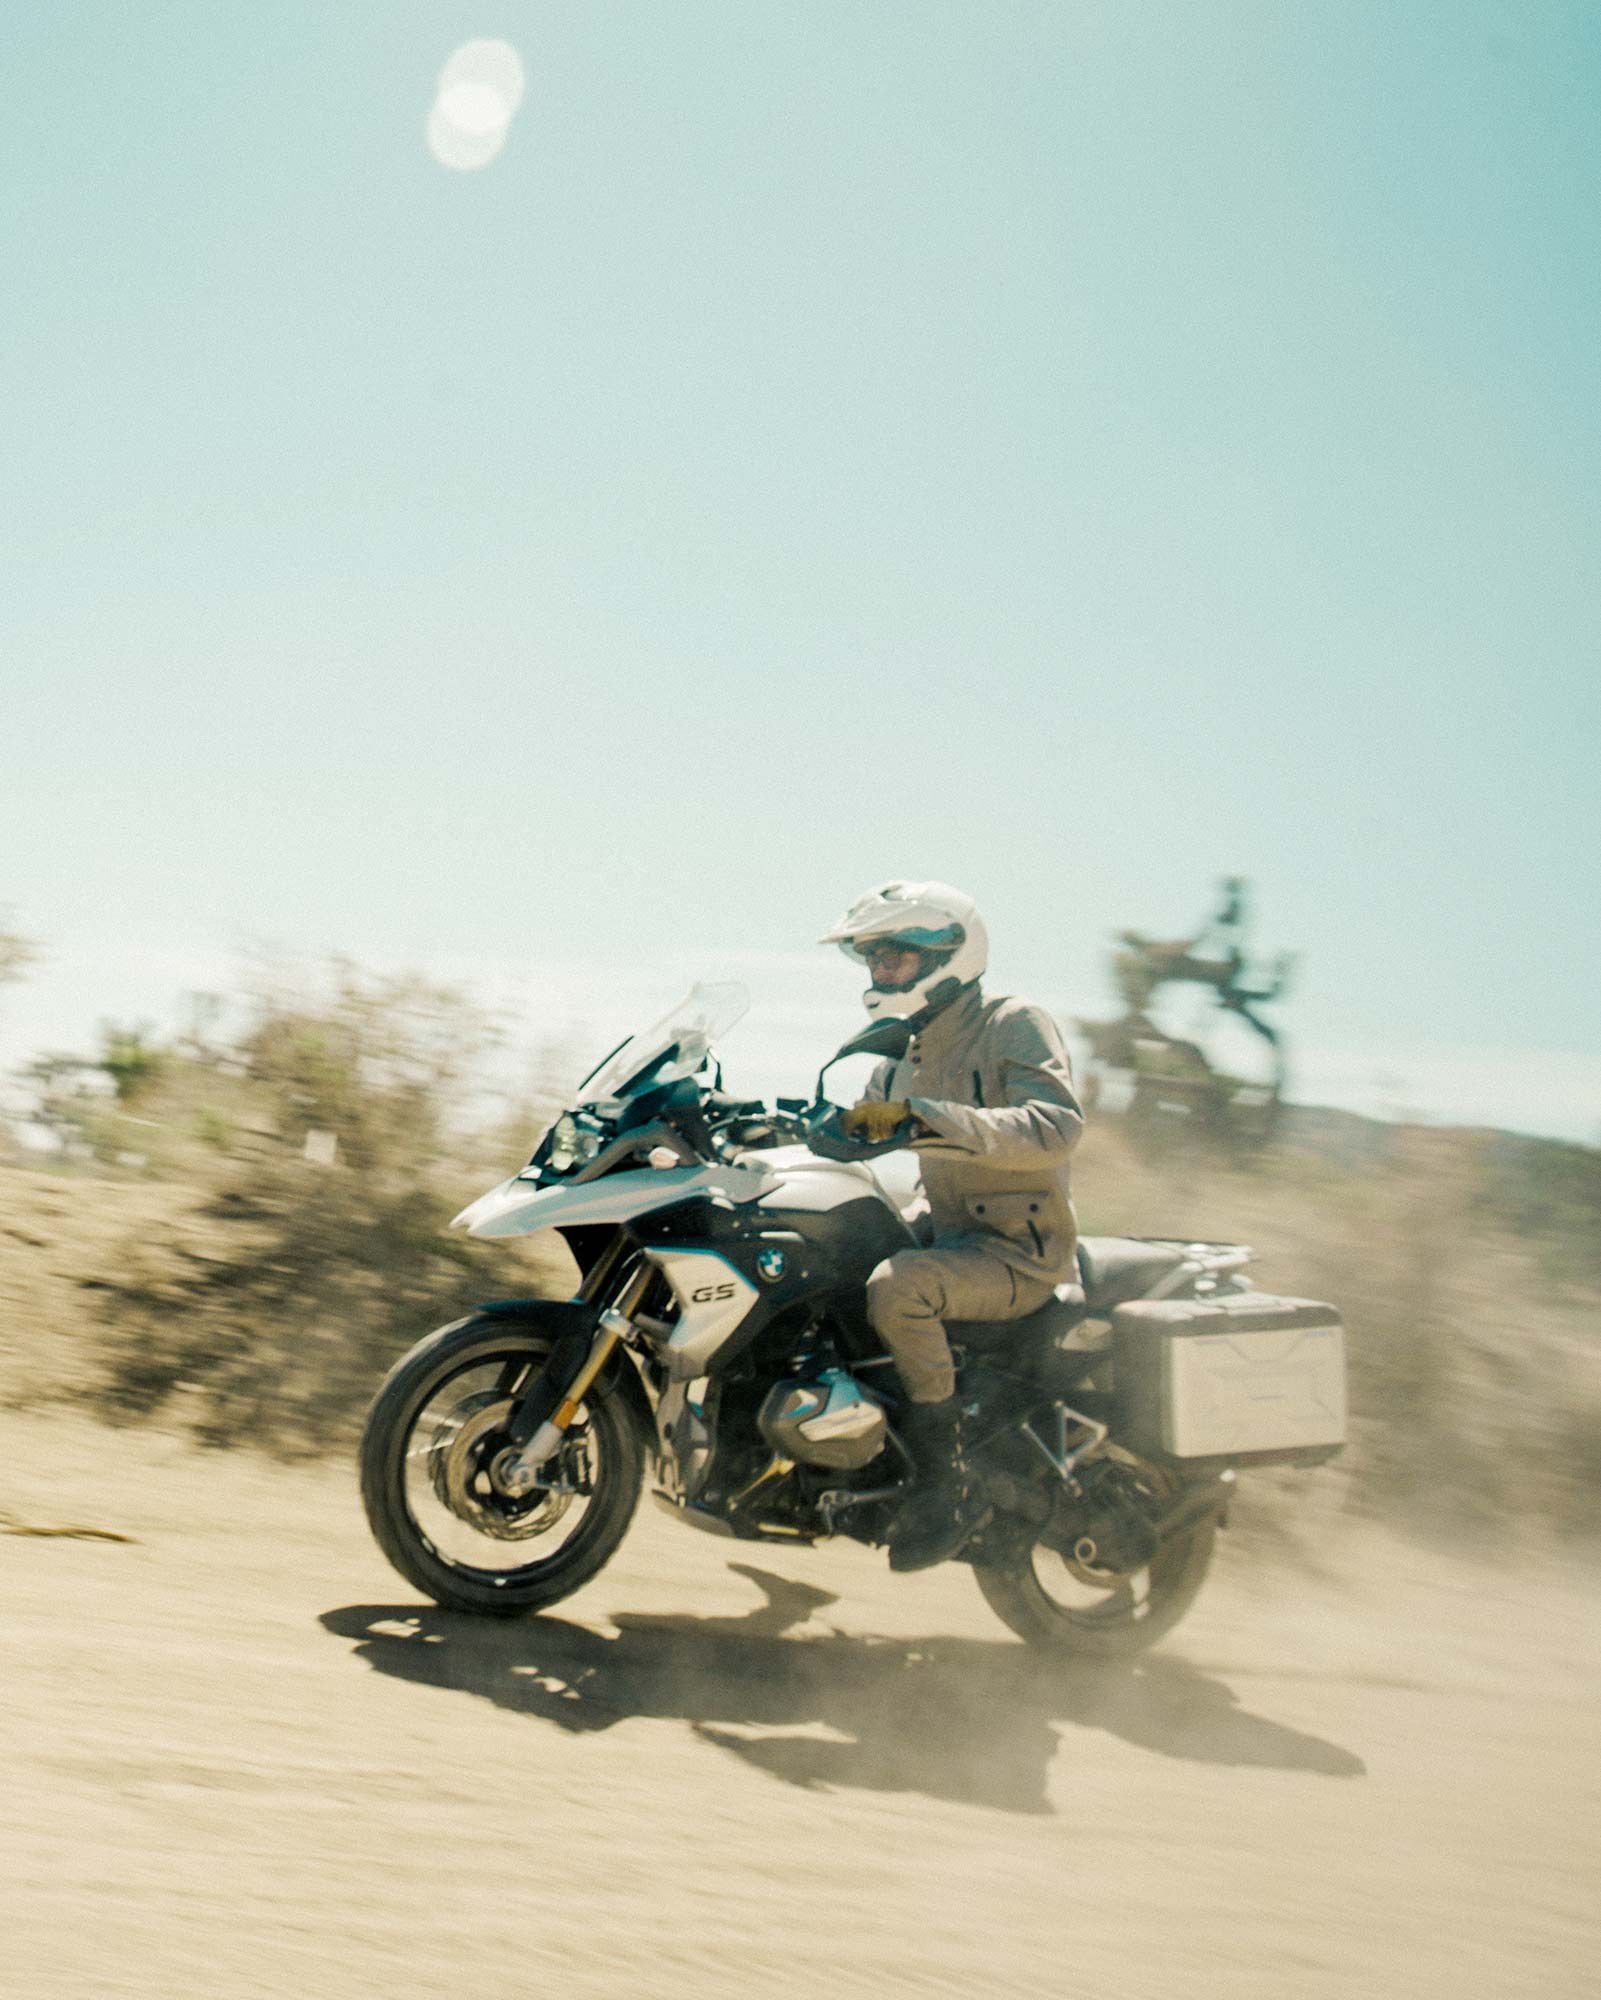 The BMW R 1250 GS is perfectly at home on trails like 2N02, easily ascending the rocky climbs and crossing any patches of sand or gravel we encountered.